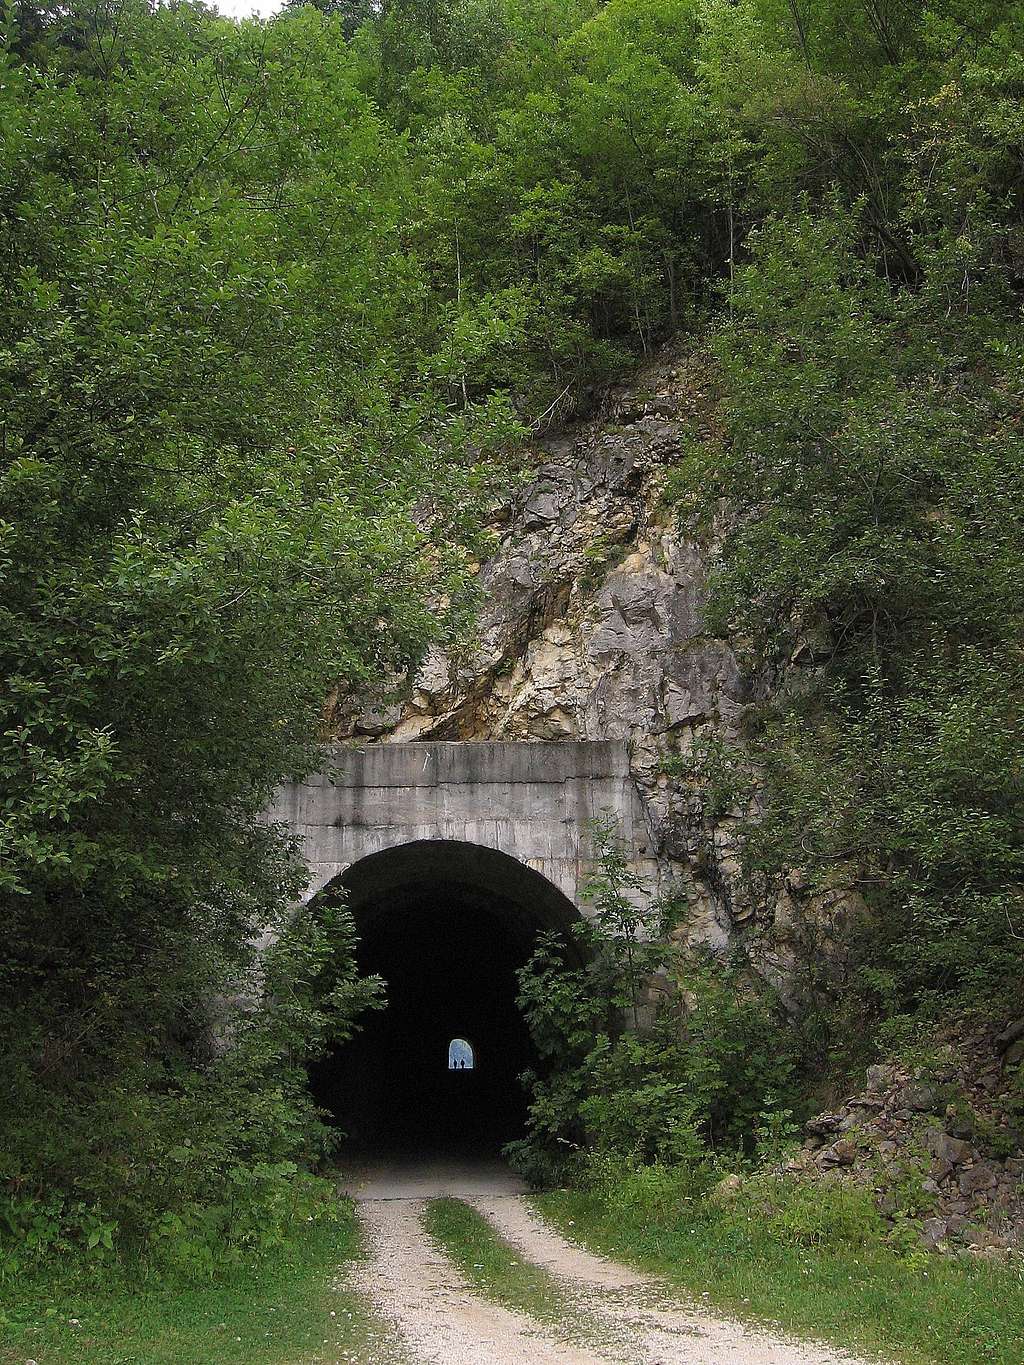 The tunel from the car road, about 4 km from Cheia hut.